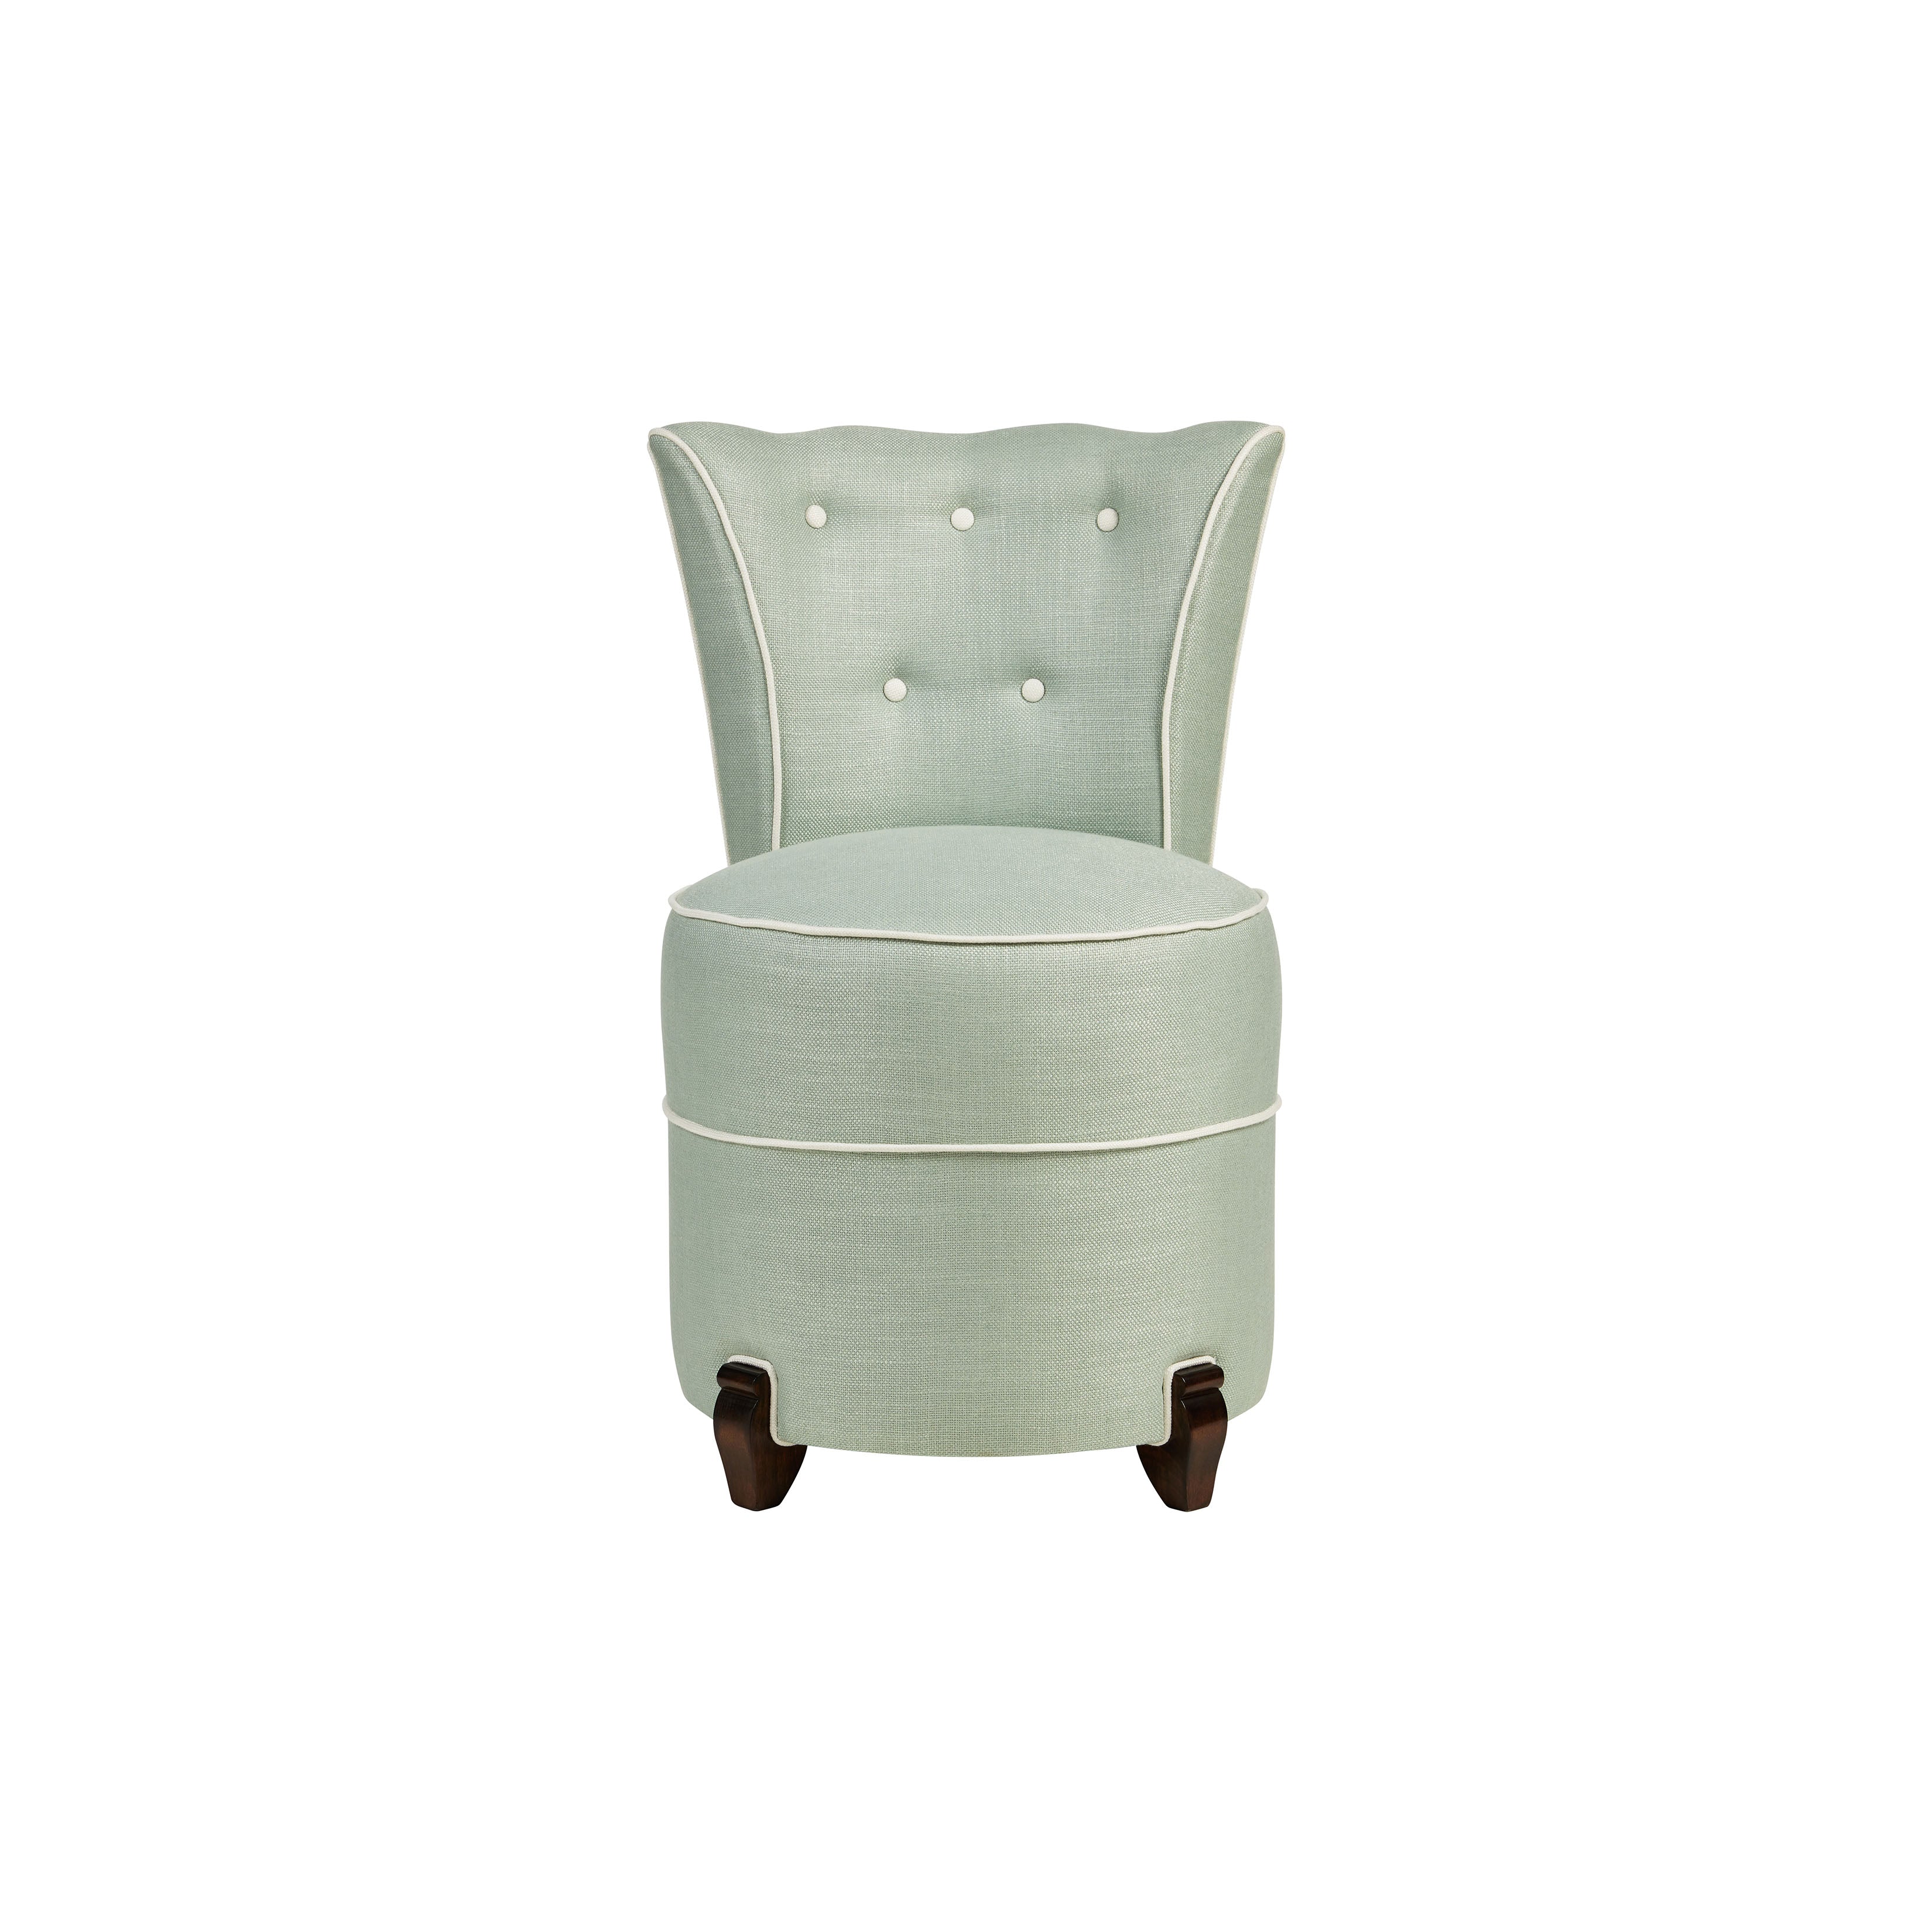 Nina Campbell Coco Dressing Table chair